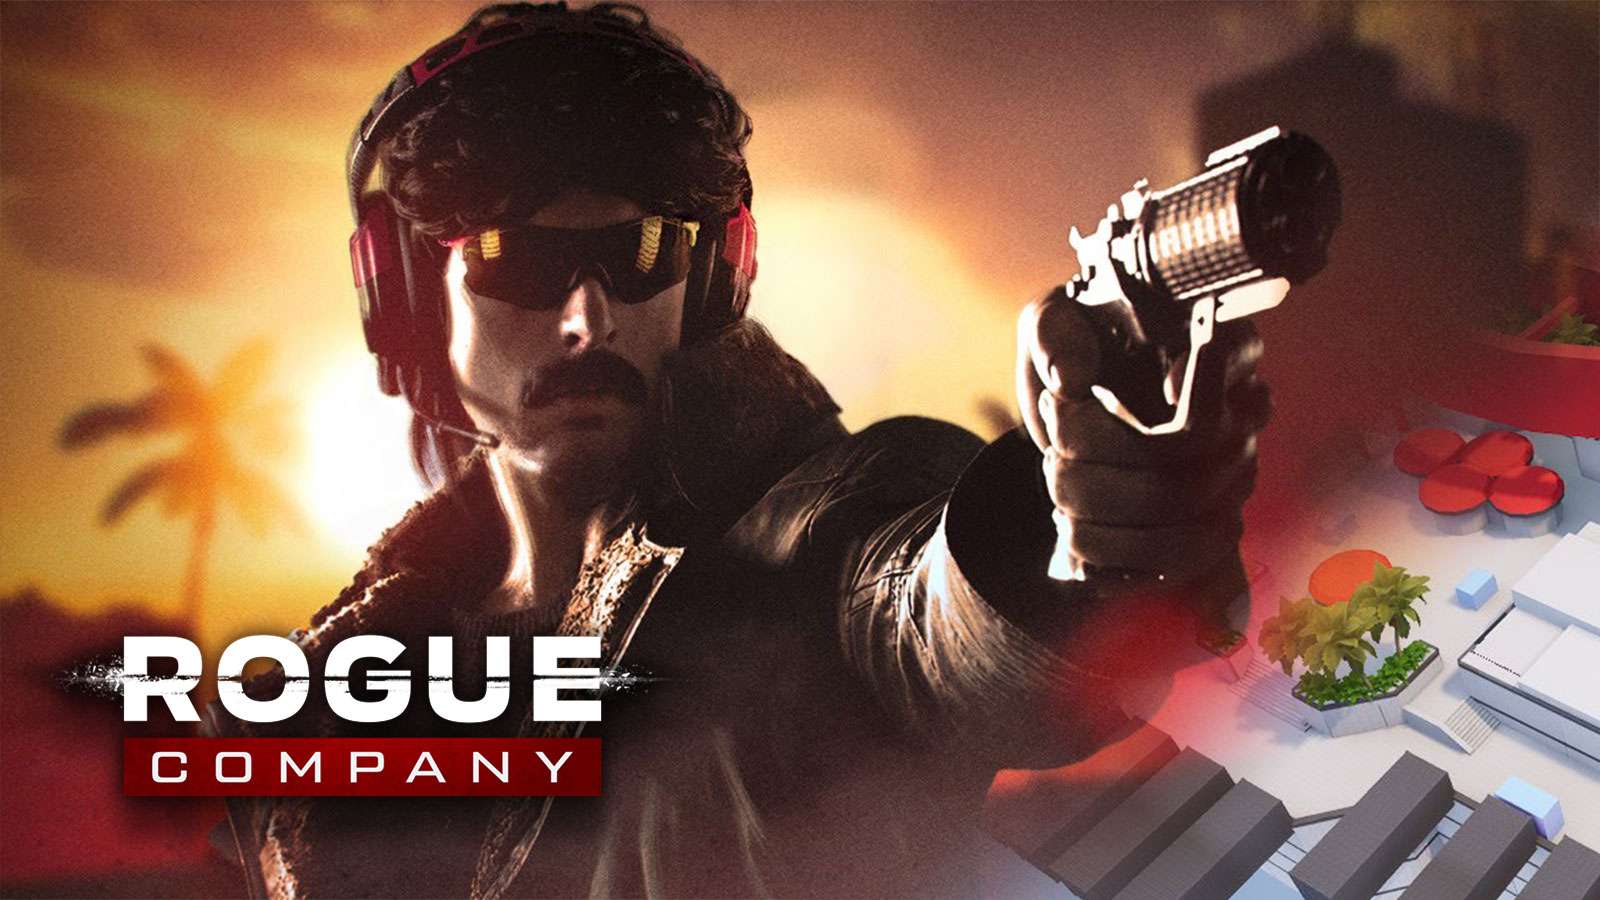 Rogue Company devs starting work on Dr Disrespect’s “Arena” map soon ...